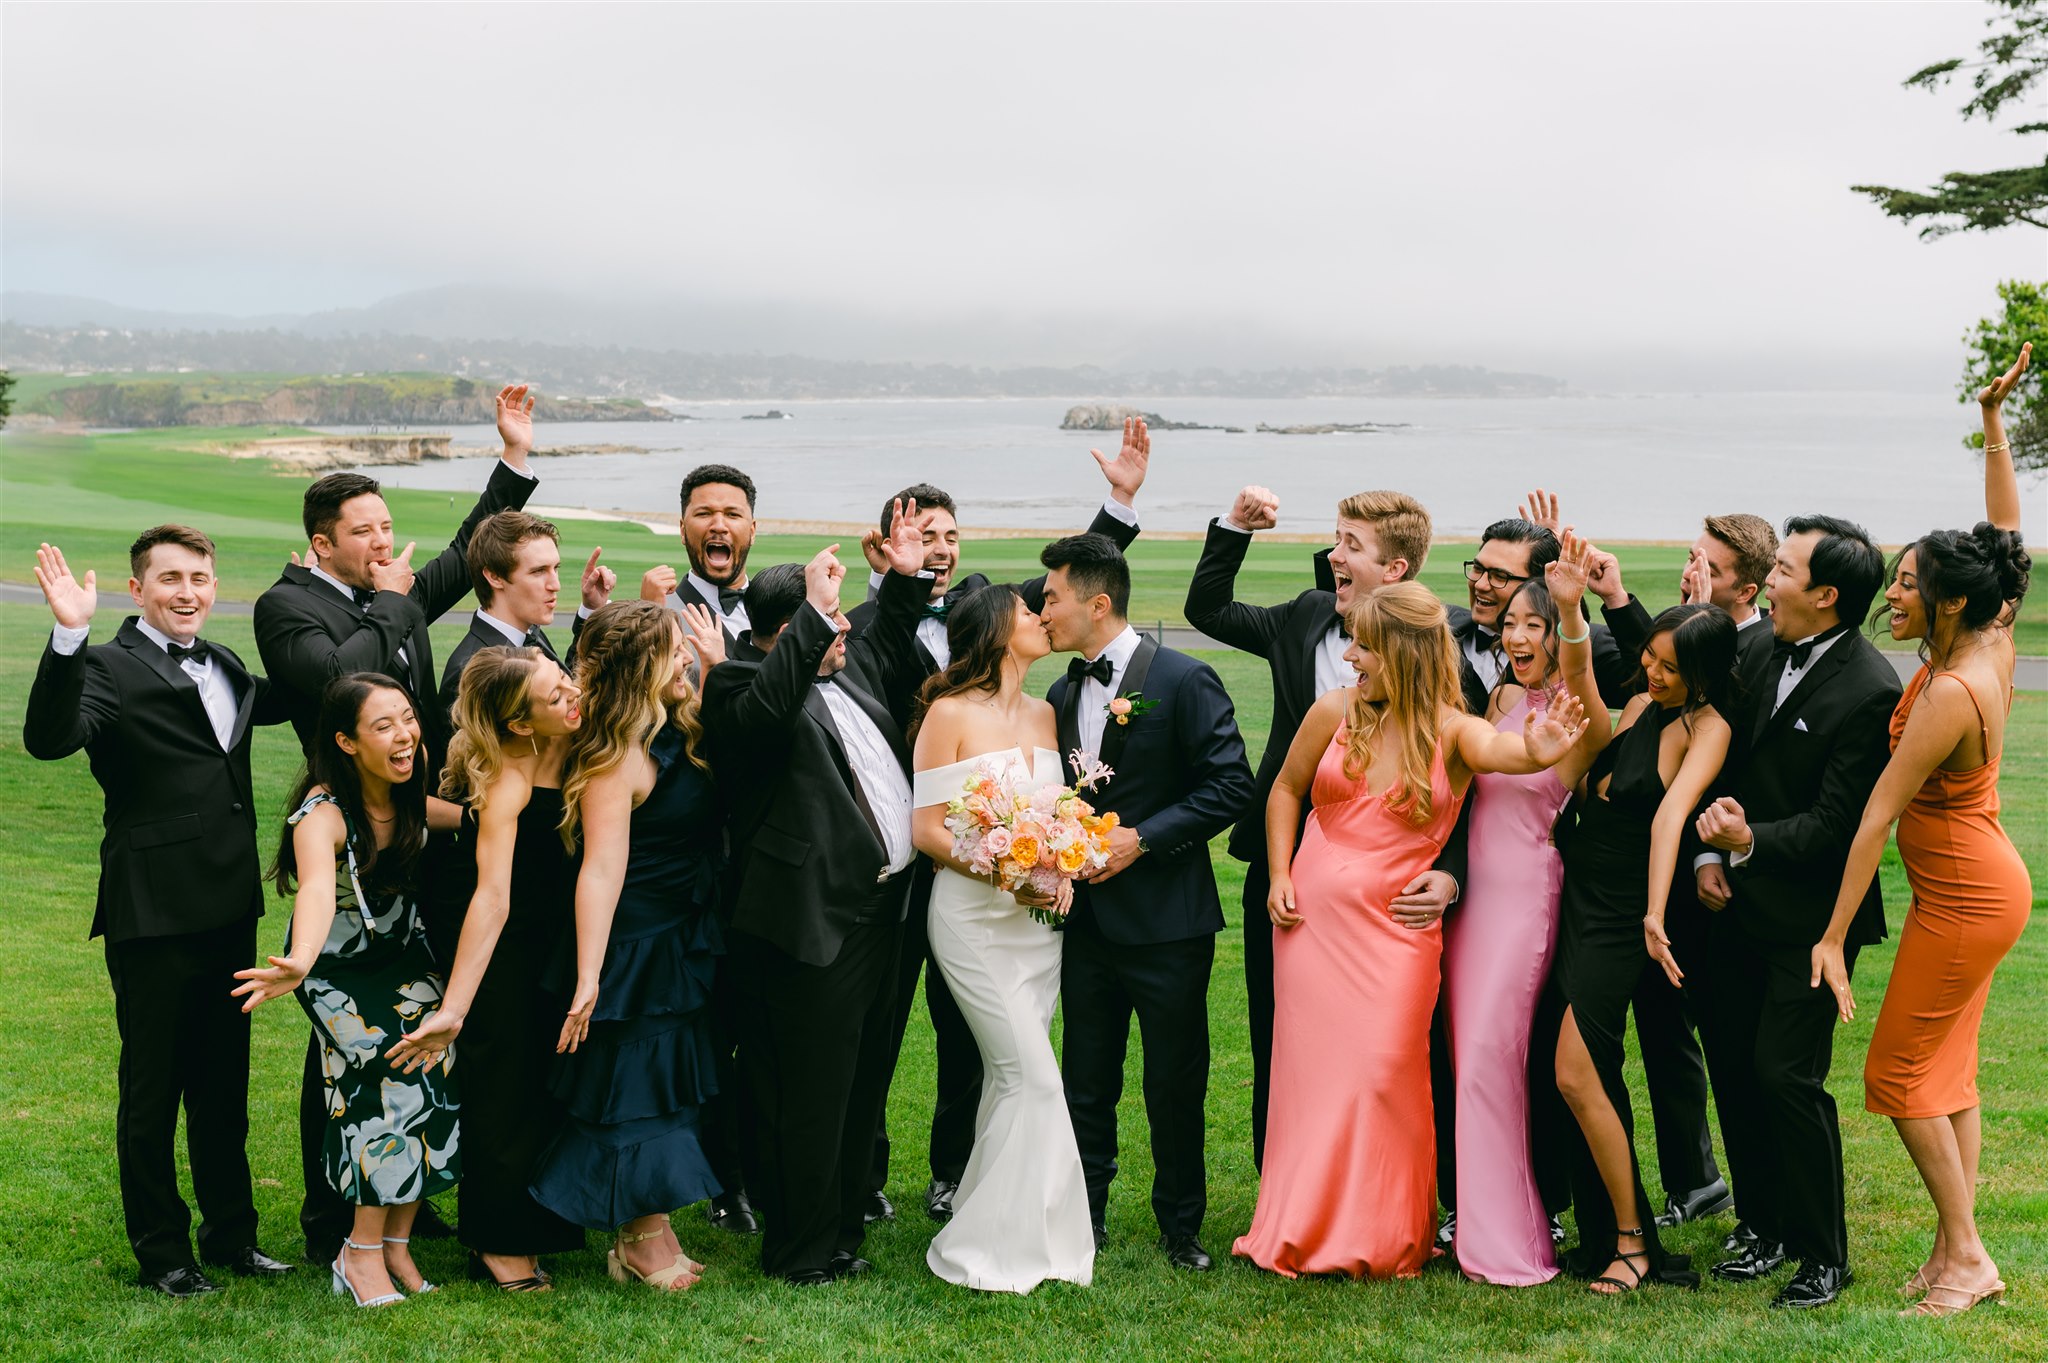 bridal party portraits unmatching bridesmaid dresses black suits with black bowtie beachside wedding bride and groom kiss peach pinks and white delicate floral wedding bouquet